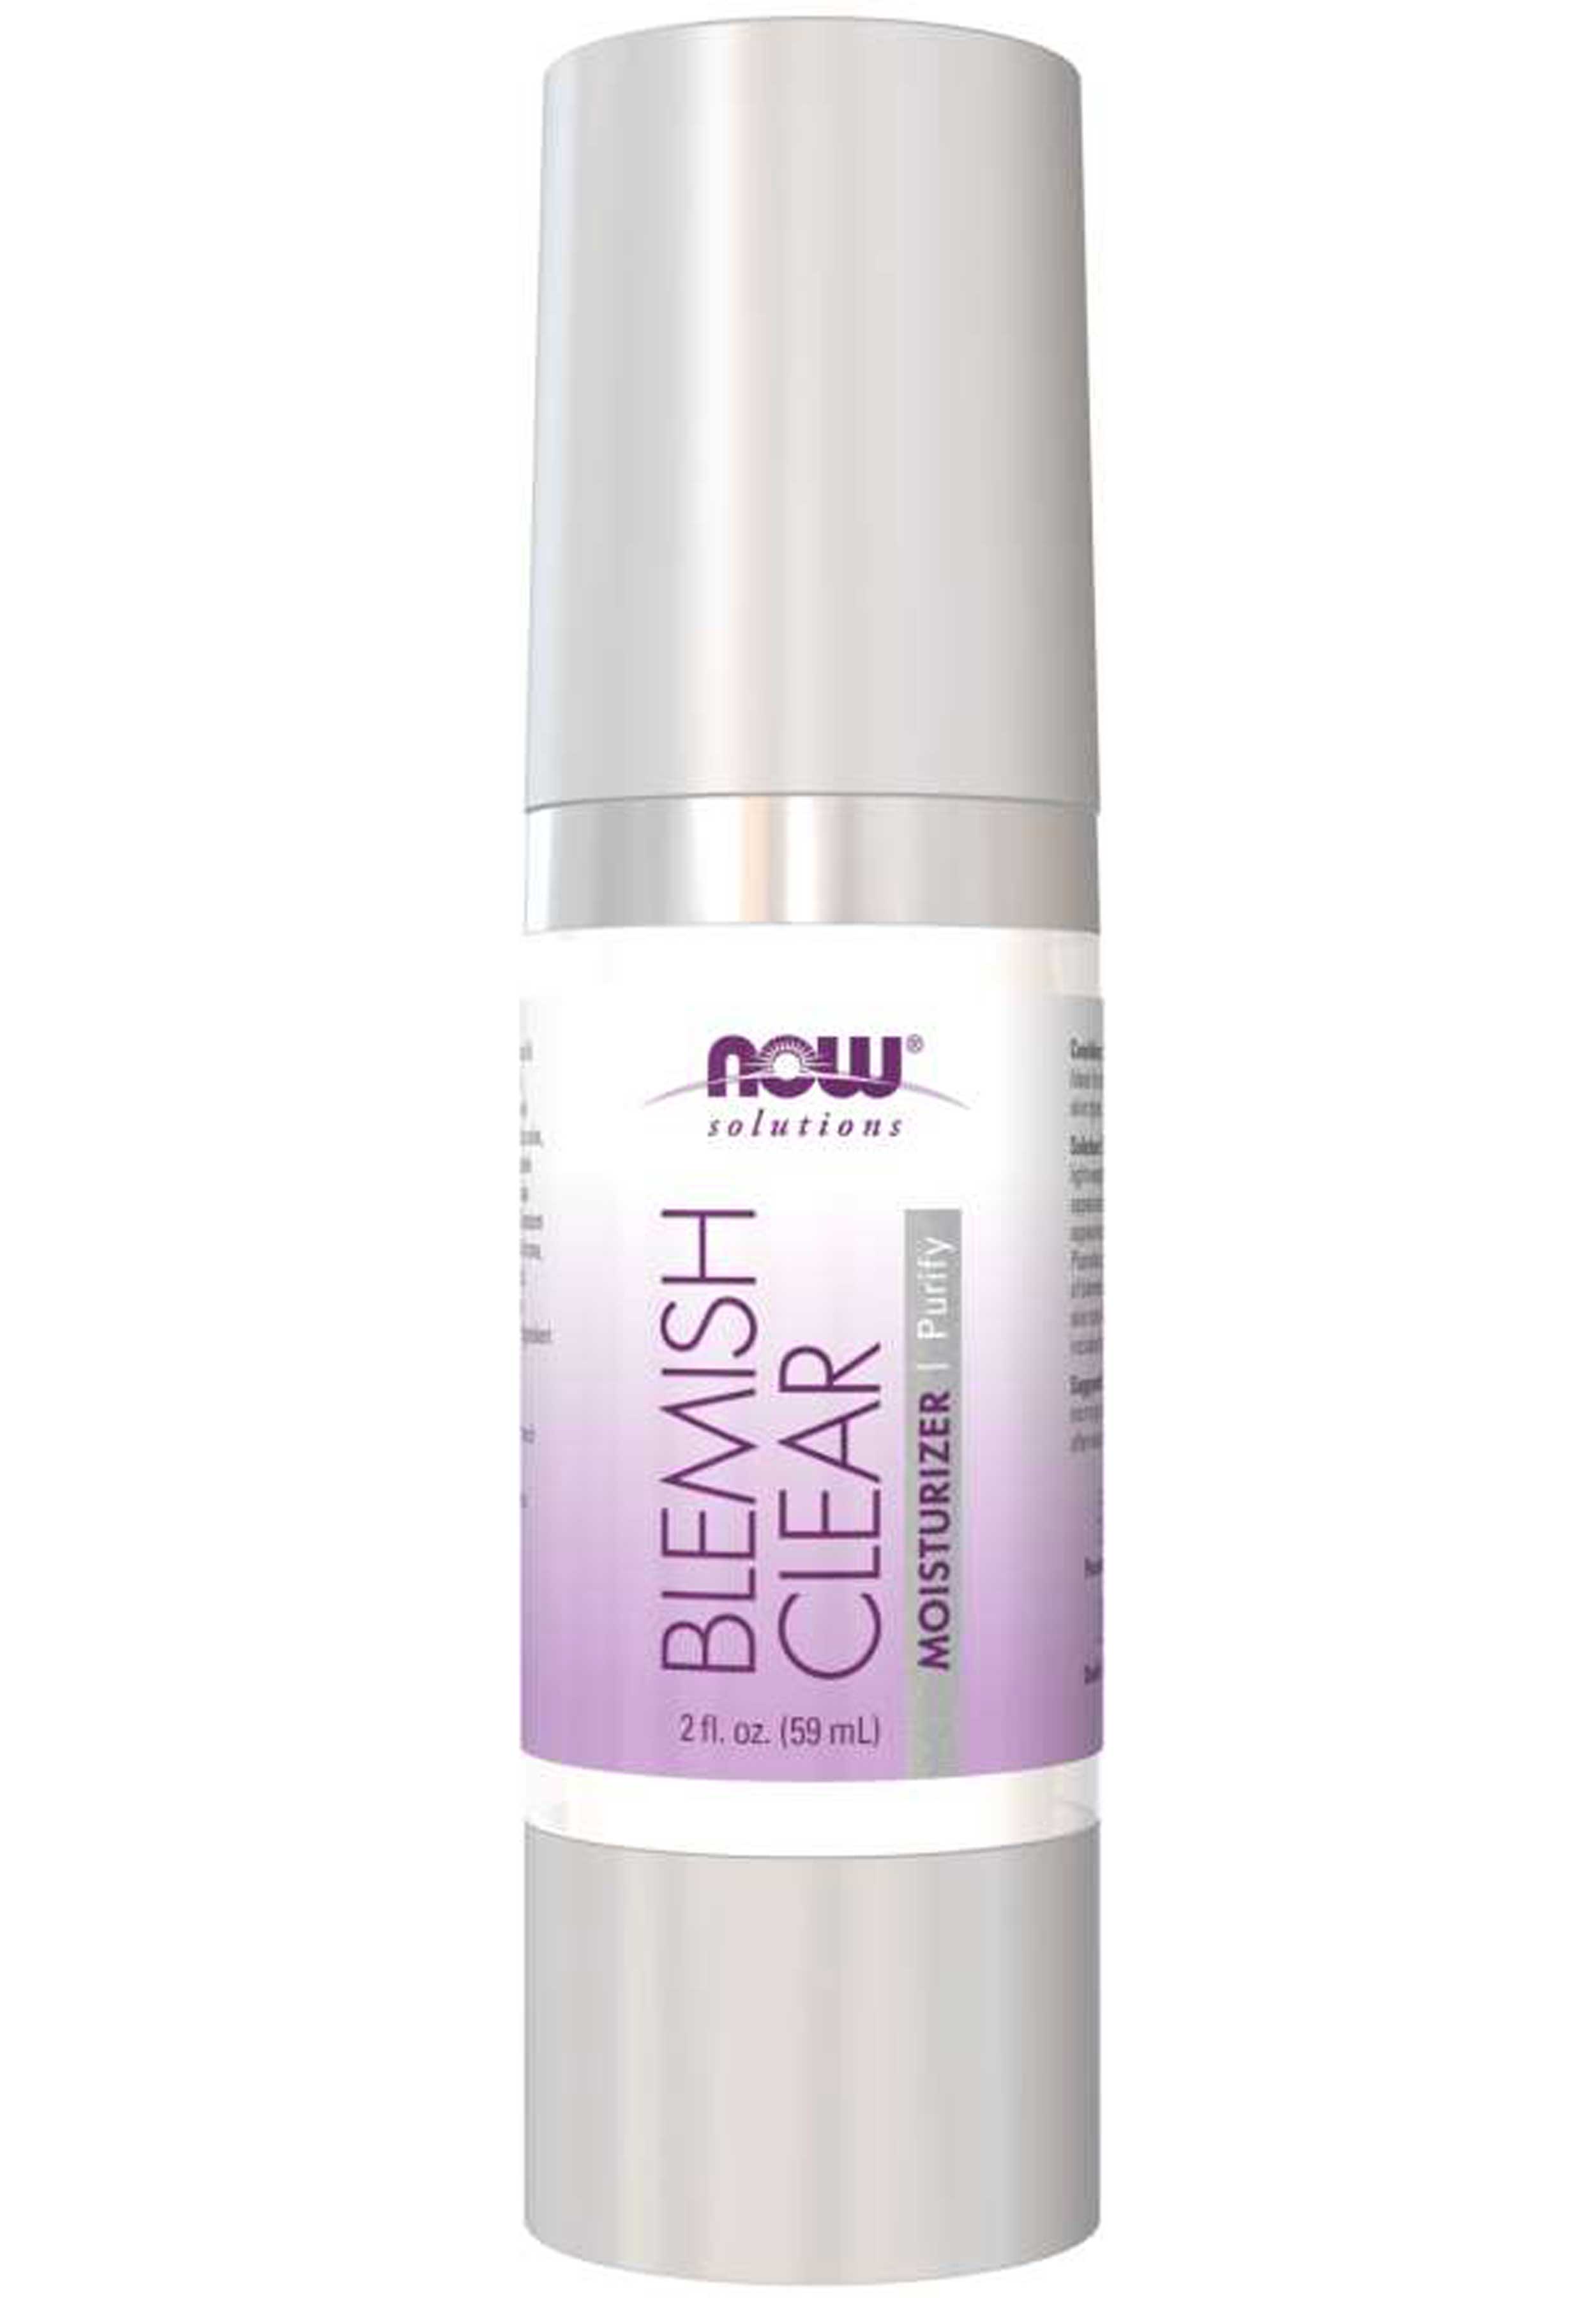 NOW Solutions Blemish Clear Moisturizer